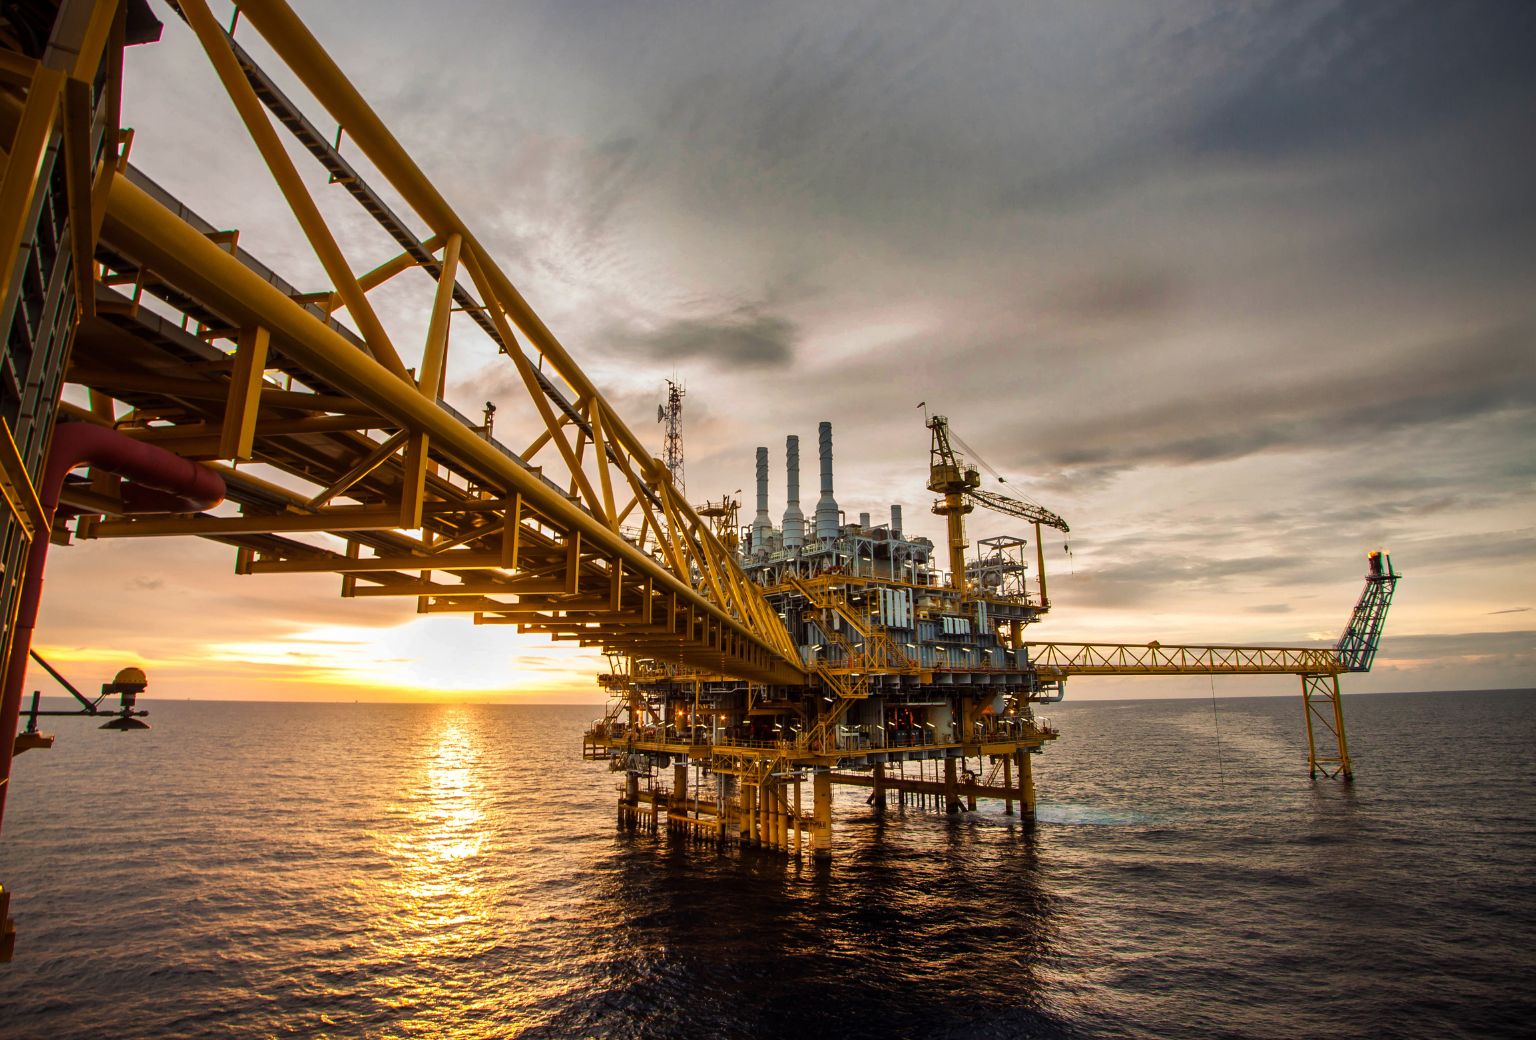 De-risking Gulf of Mexico operations and maintenance practices